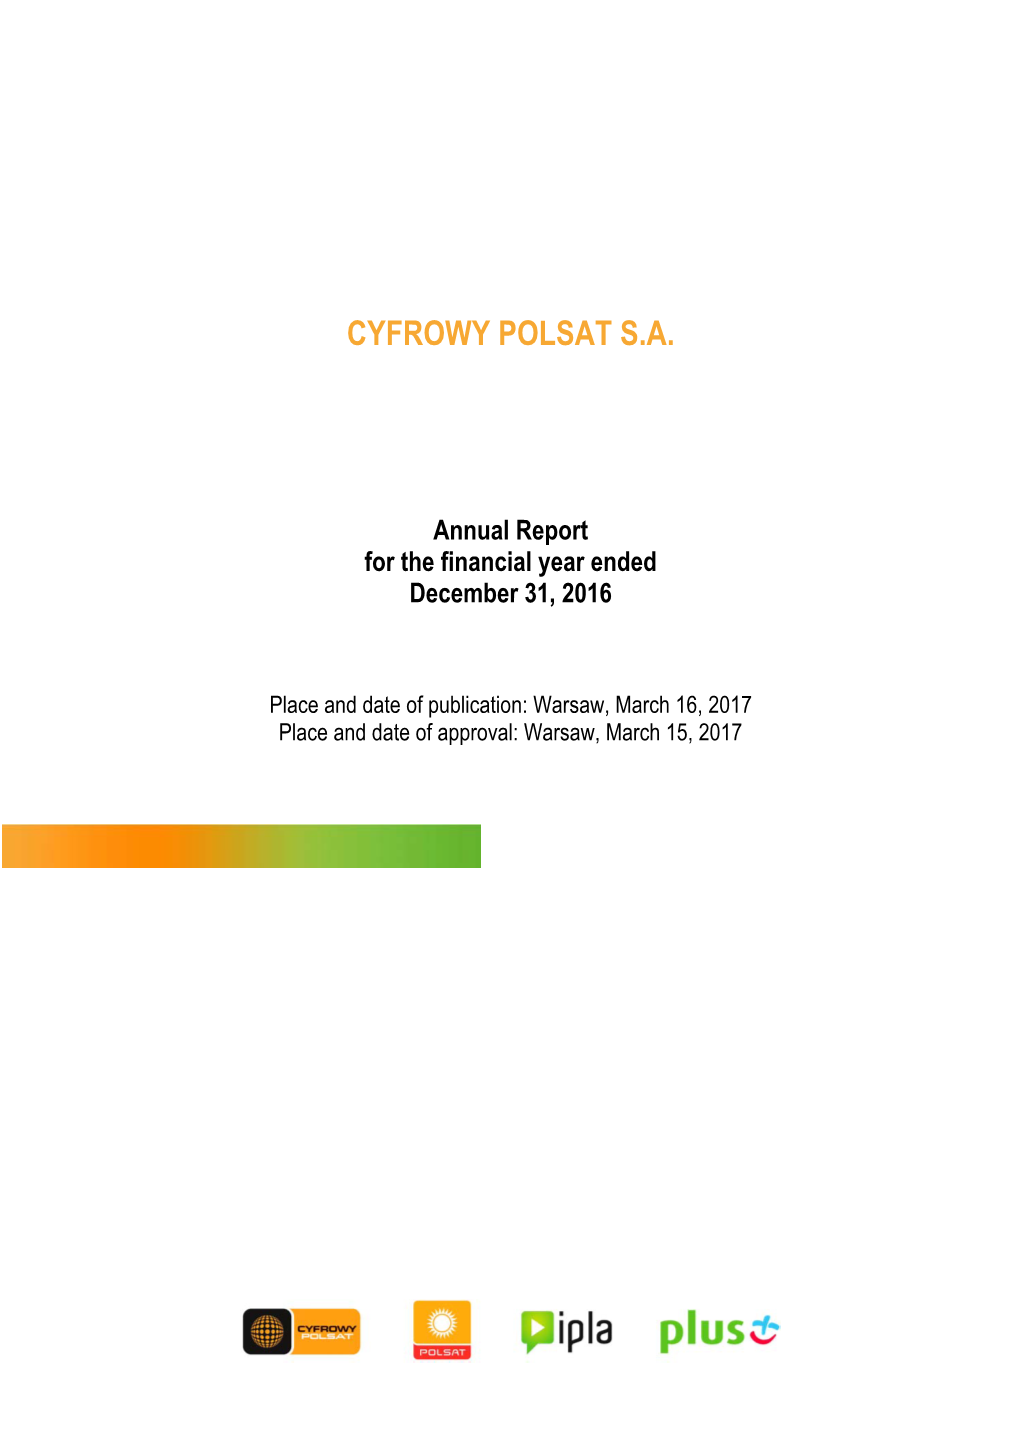 Annual Report of Cyfrowy Polsat S.A. for the Financial Year Ended December 31, 2016